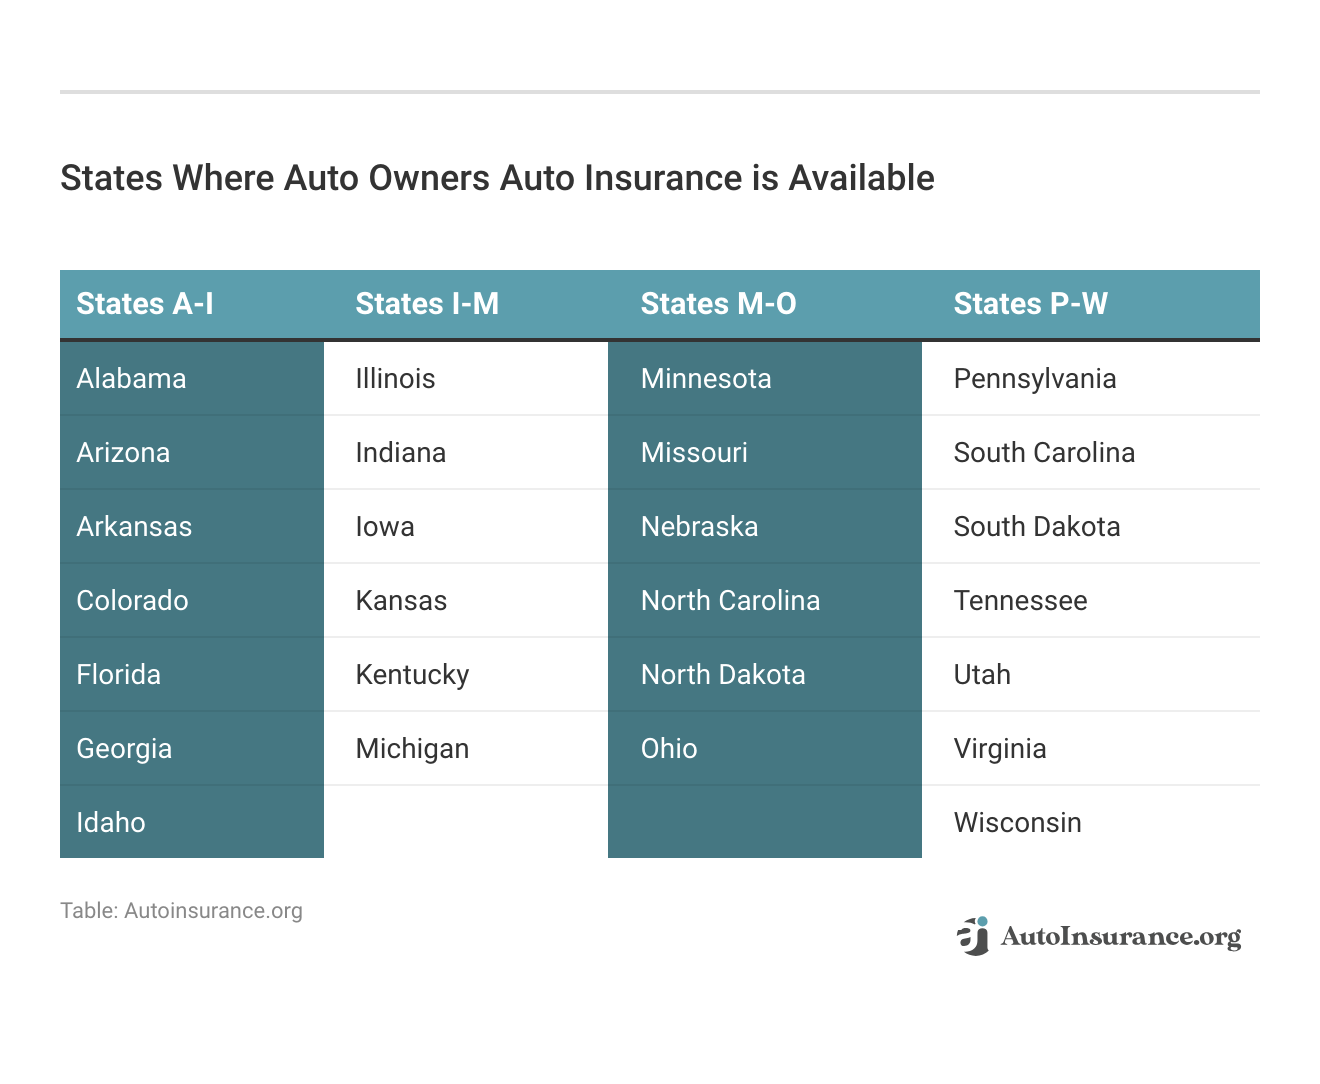 <h3>States Where Auto Owners Auto Insurance is Available</h3>